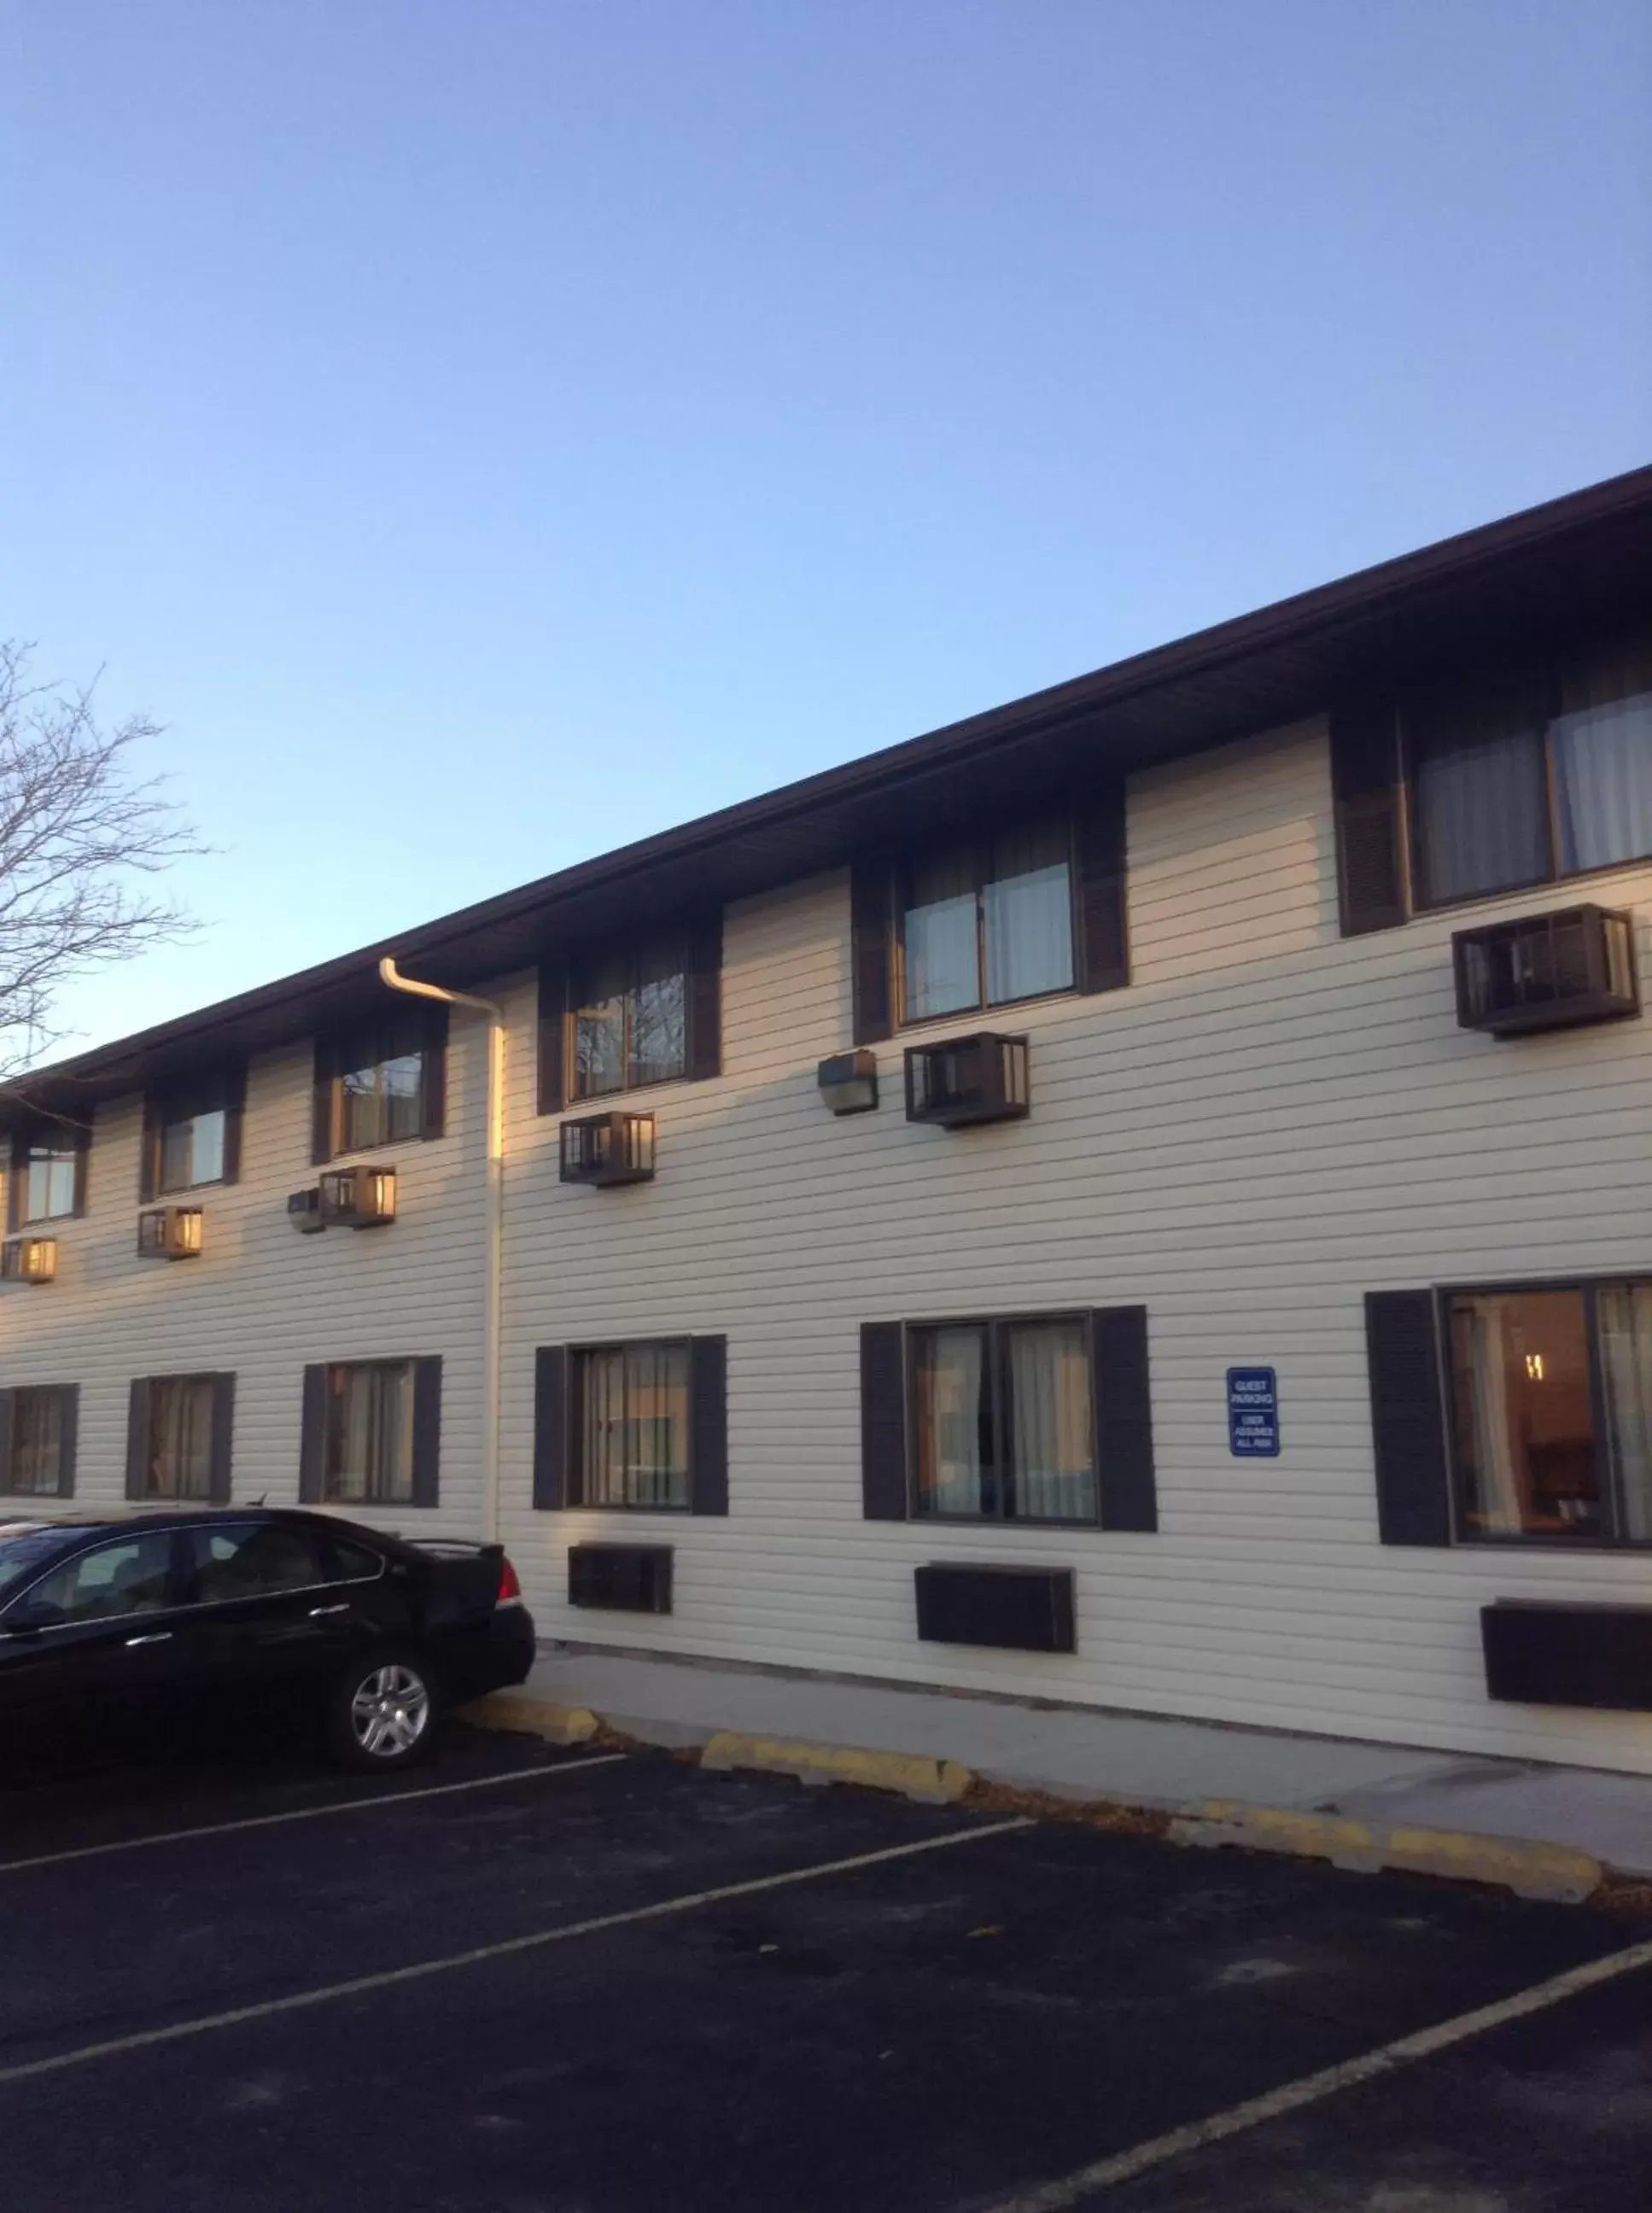 Property Building in Days Inn by Wyndham Ankeny - Des Moines